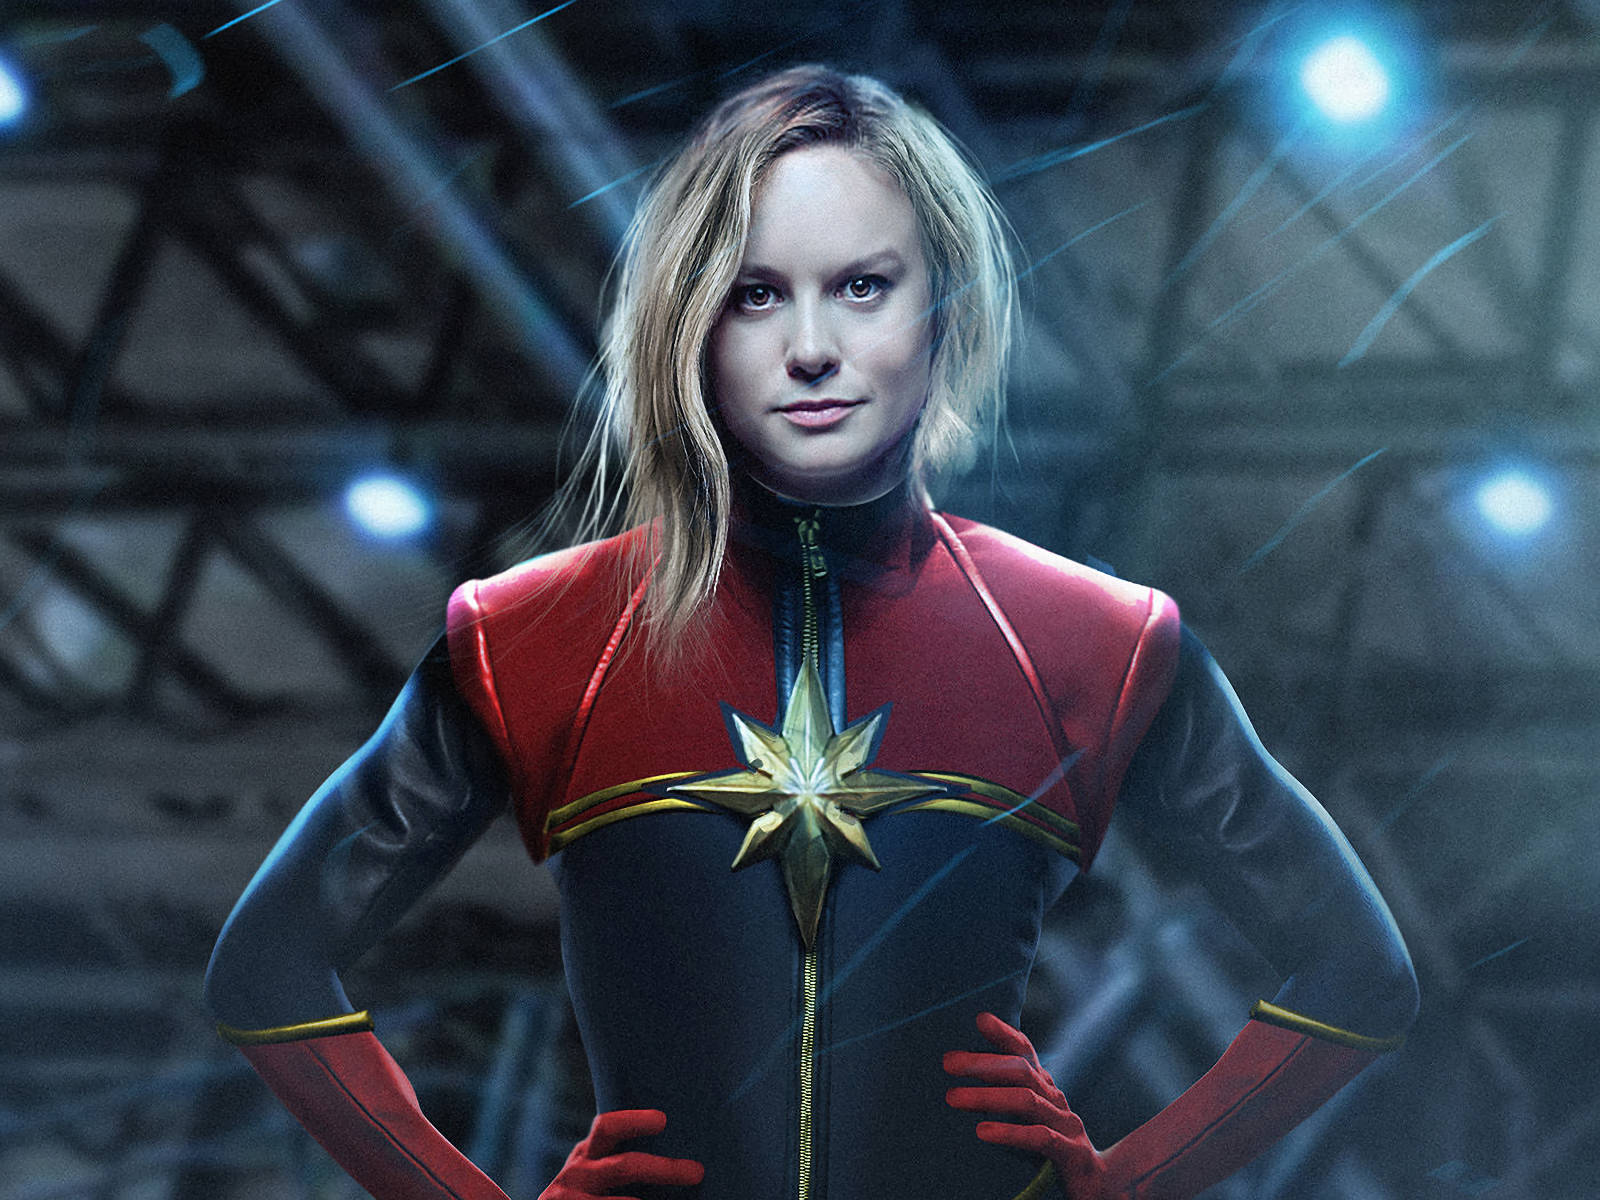 Kick your web development projects into overdrive with Captain Marvel Computer Wallpaper